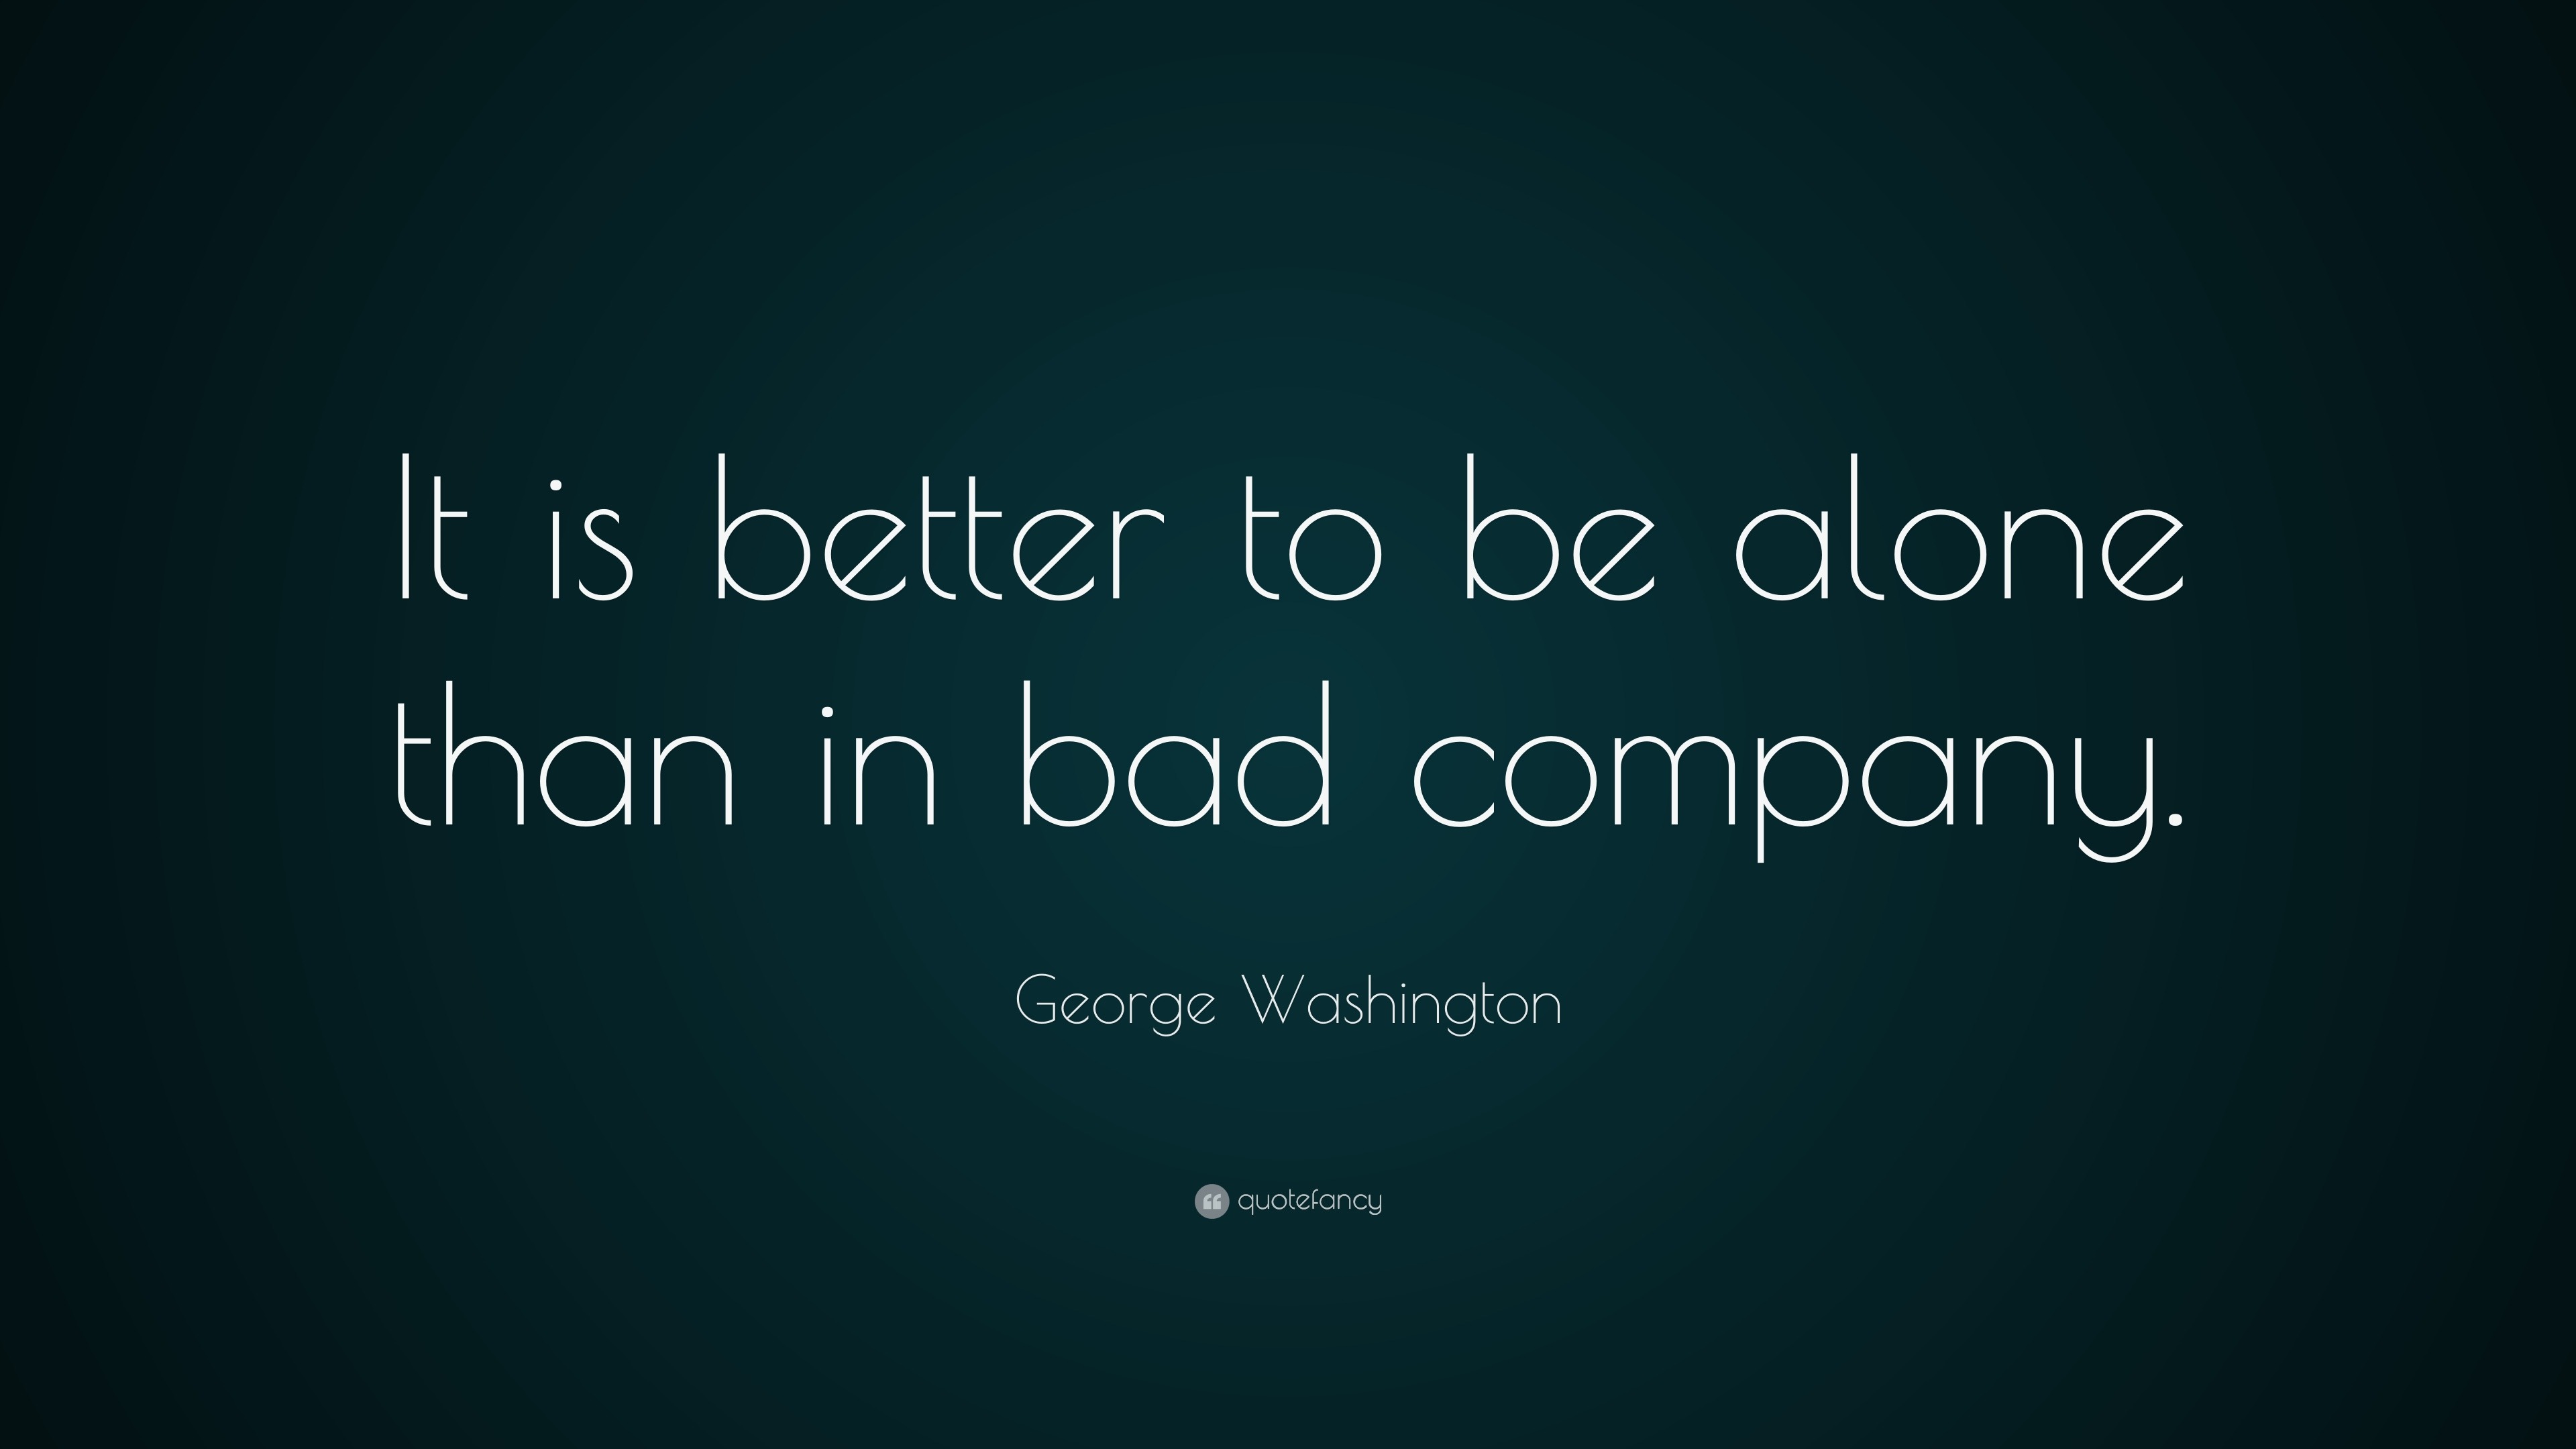 George Washington Quotes (100 wallpapers) - Quotefancy